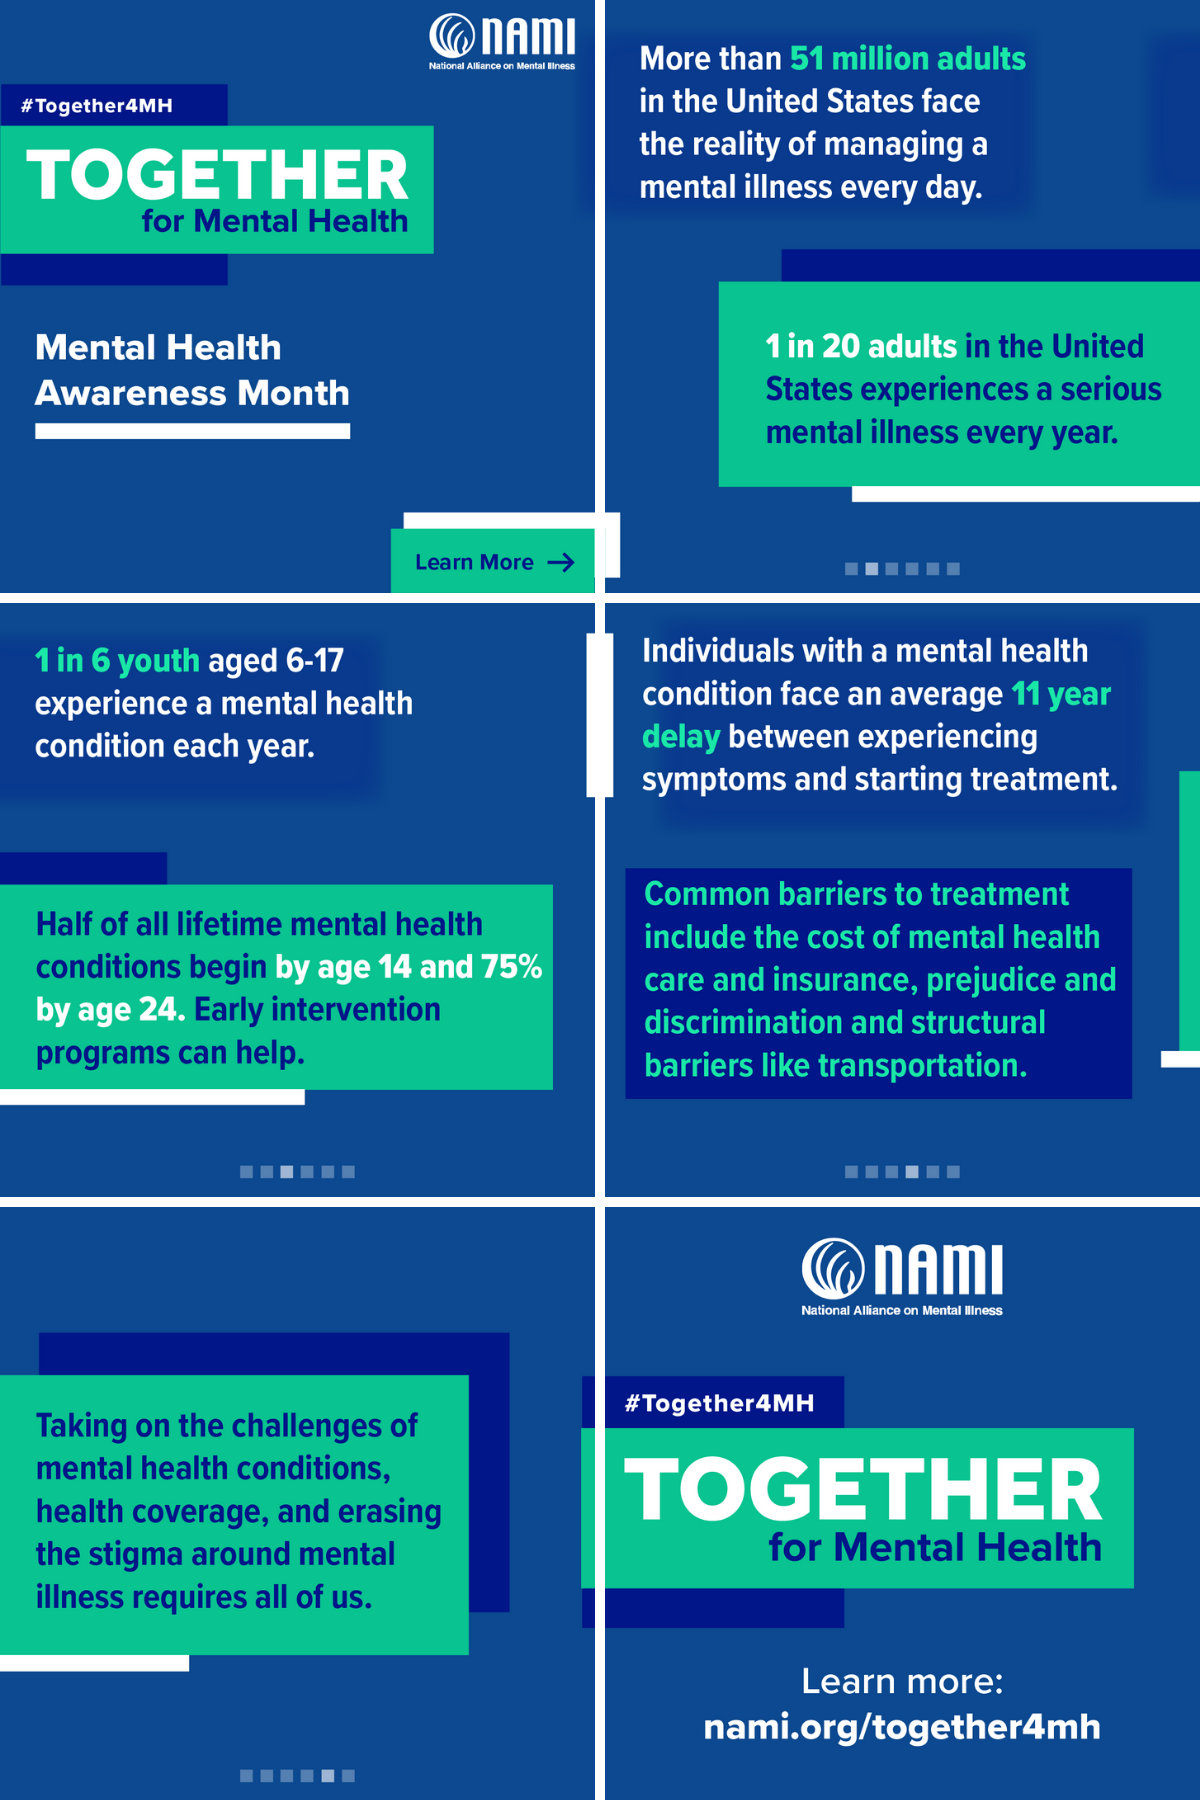 NAMI National Alliance on Mental Illness | #Together4MH Together for Mental Health | Mental Health Awareness Month. More than 51 million adults in the United States face the reality of managing a mental illness every day. 1 in 20 adults in the United States experiences a serious mental illness every year. 1 in 6 youth aged 6-17 experience a mental health condition each year. Half of all lifetime mental health conditions begin by age 14 and 75% by age 24. Early intervention programs can help. Individuals with a mental health condition face an average 11 year delay between experiencing symptoms and starting treatment. Common barriers to treatment include the cost of mental health care and insurance, prejudice and discrimination and structural barriers like transportation. Taking on the challenges of mental health conditions, health coverage, and erasing the stigma around mental illness requires all of us. #Together4MH Together for Mental Health. Learn more: nami.org/together4mh